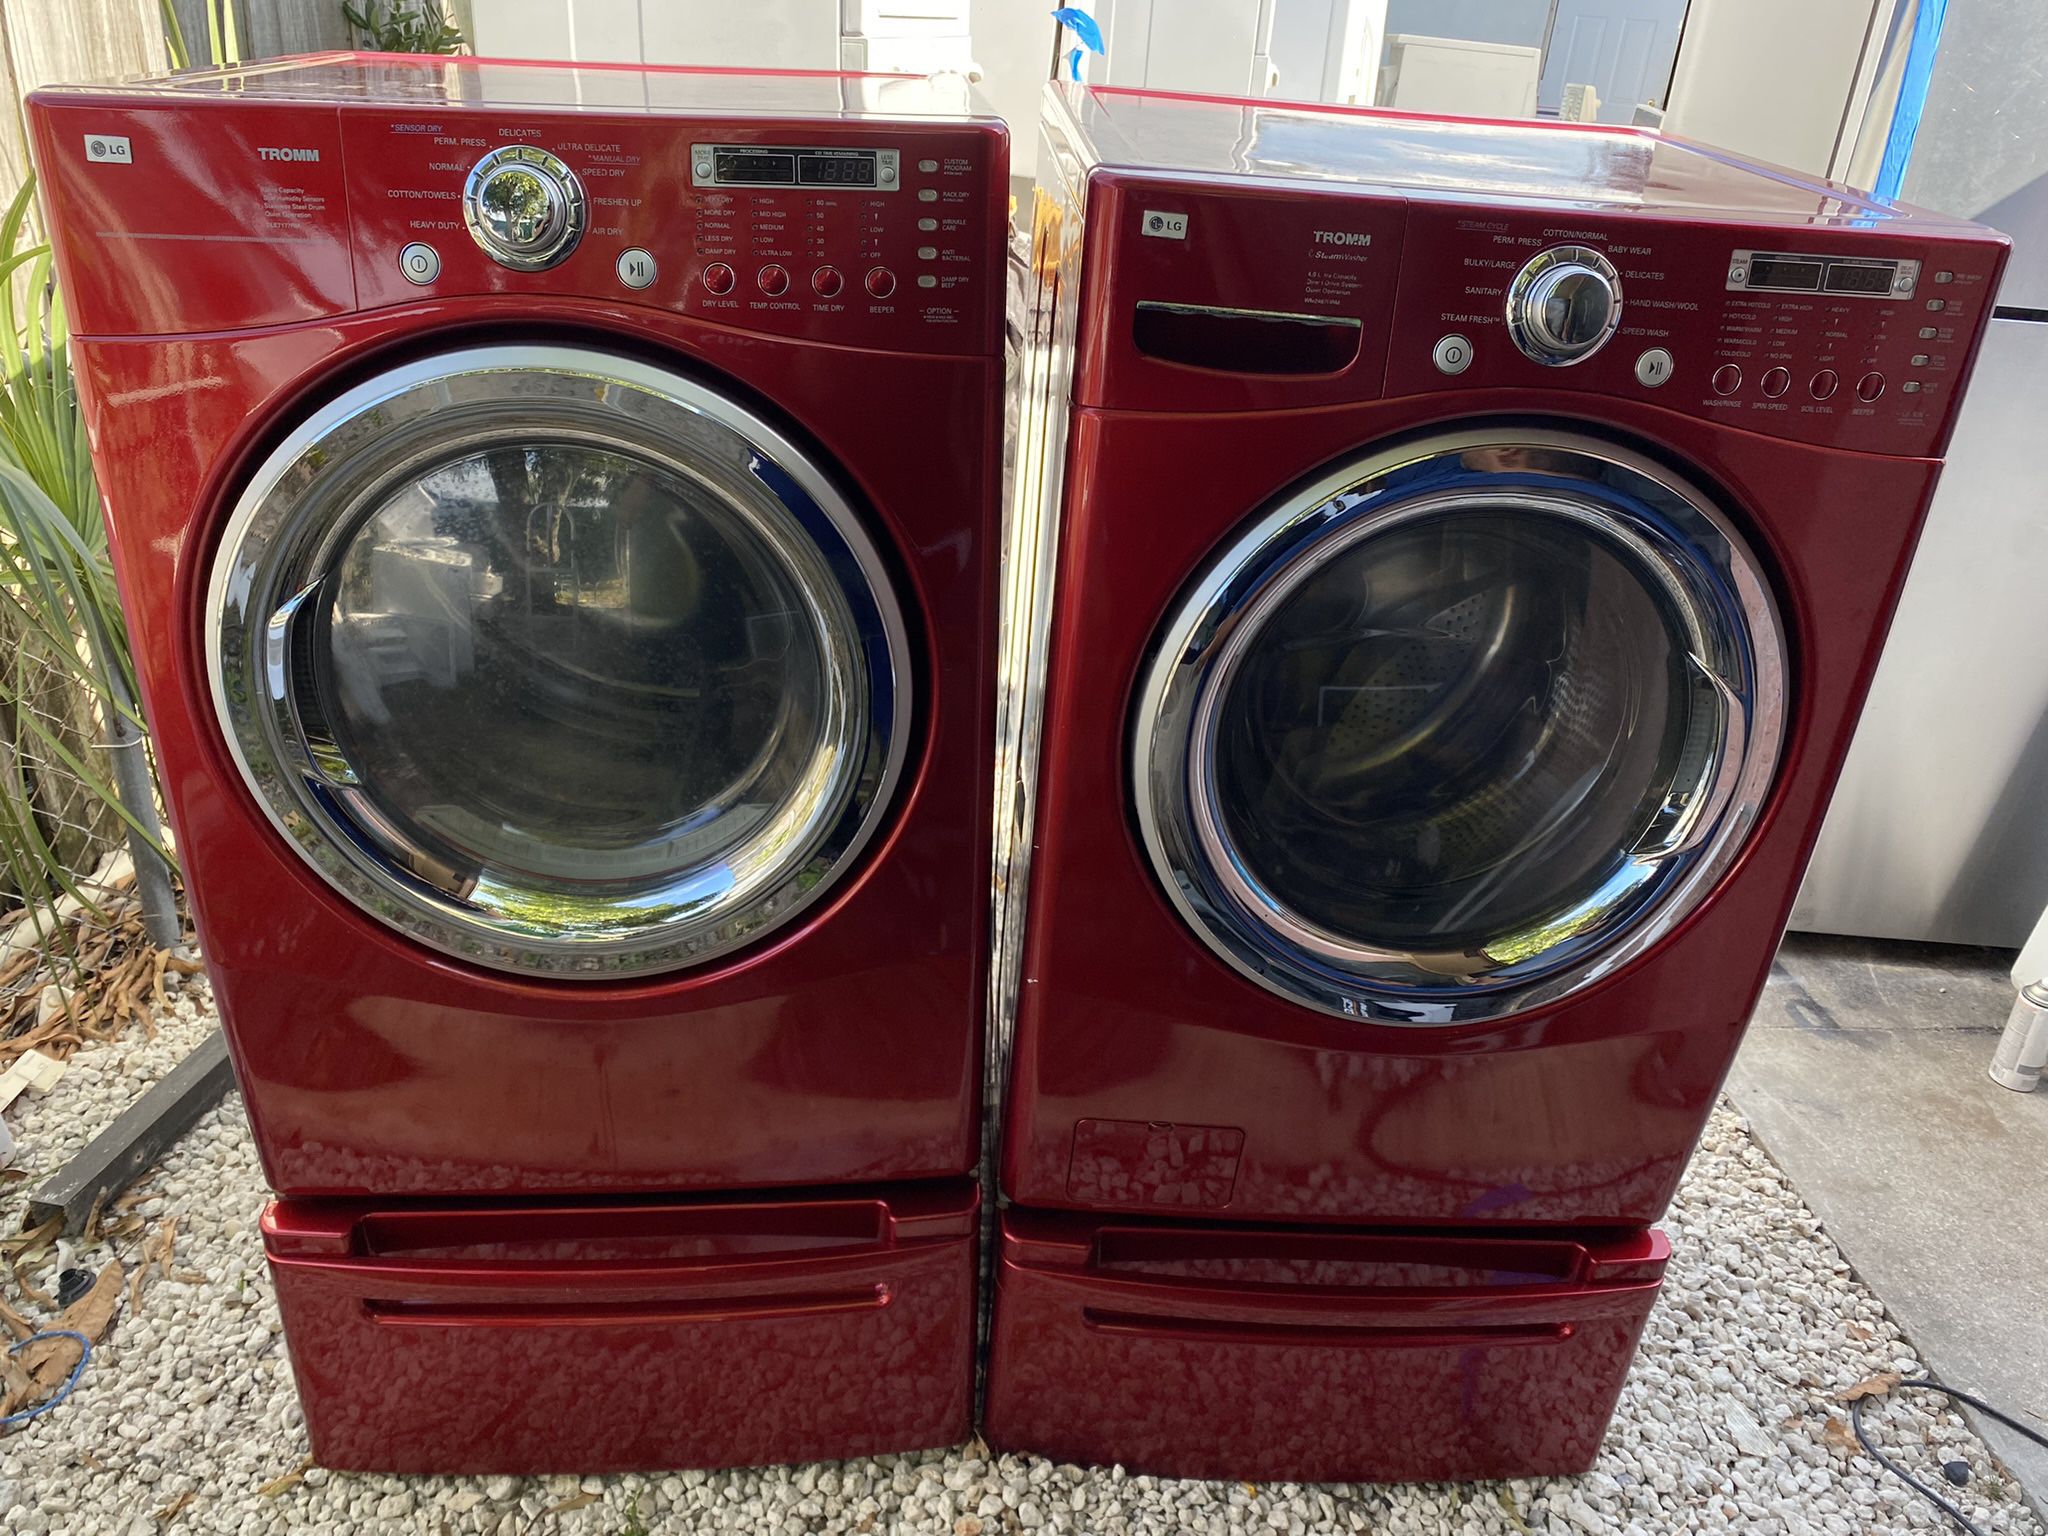 LG Washer And Dryer Red Front Load With Pedestals Working Perfectly Fine 